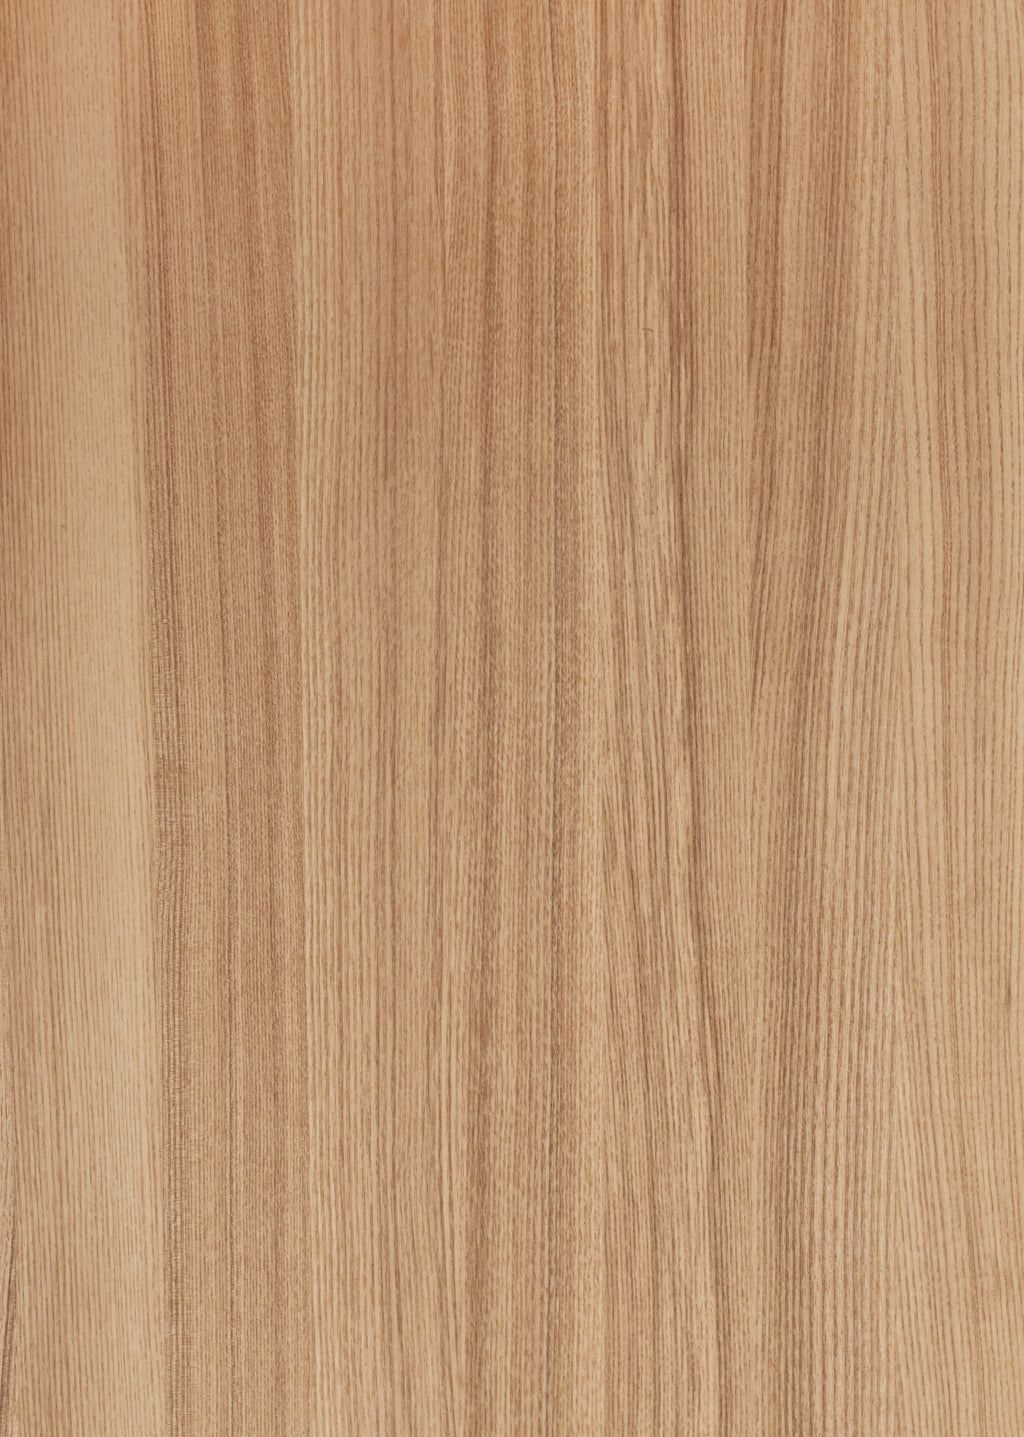 Ash Wood The Benefits of Using this Durable and Versatile Wood Species